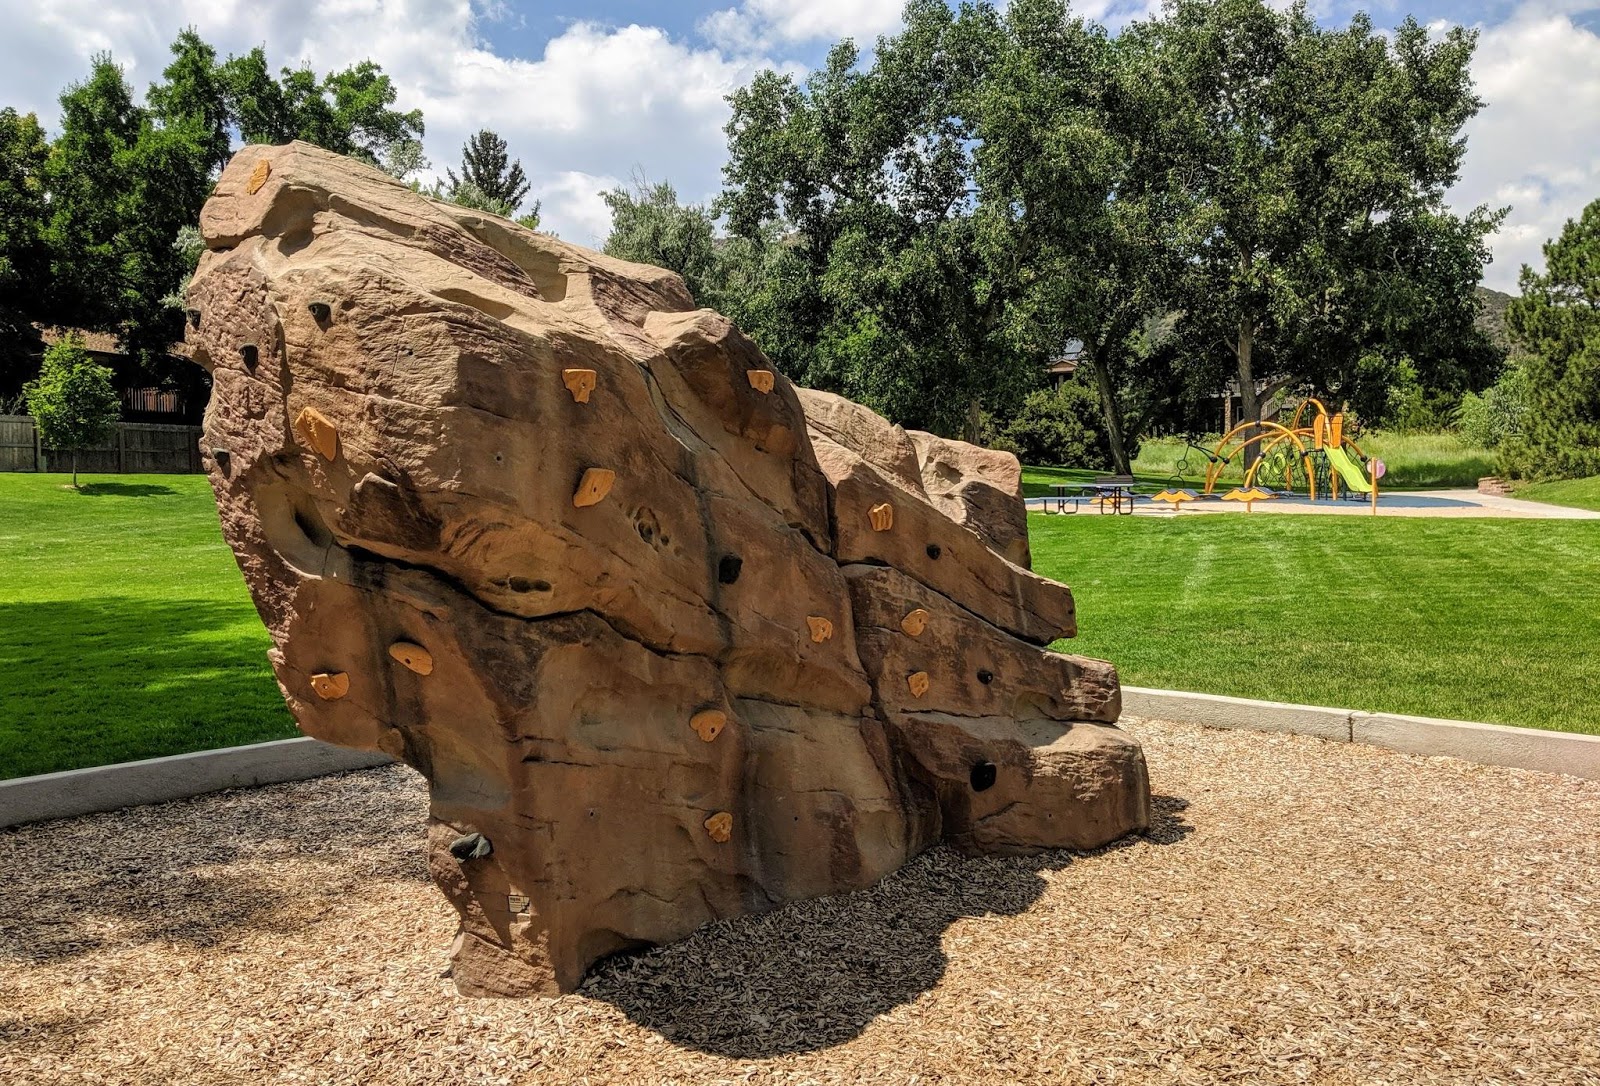 Awesome Golden Playgrounds Your Kids Will Love! The Golden Group Real Estate Advisors pic